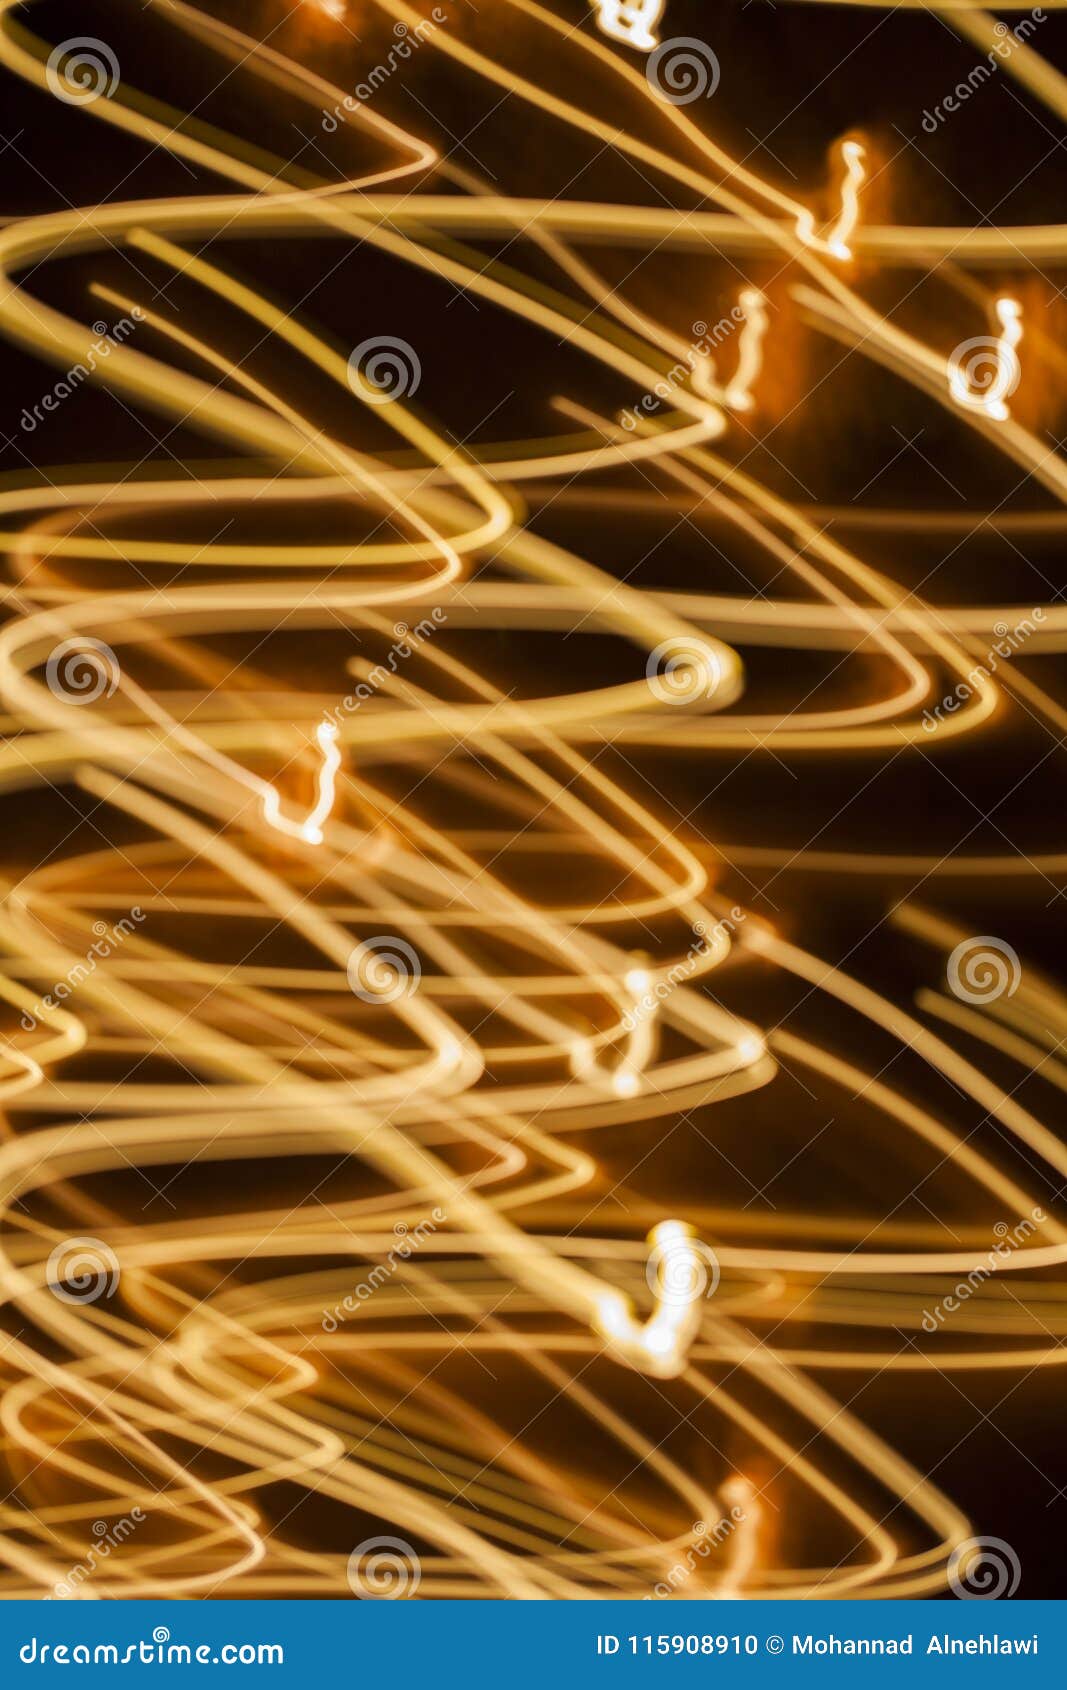 Swirl Sparkling Glowing Lines Background Stock Photo - Image of pattern ...